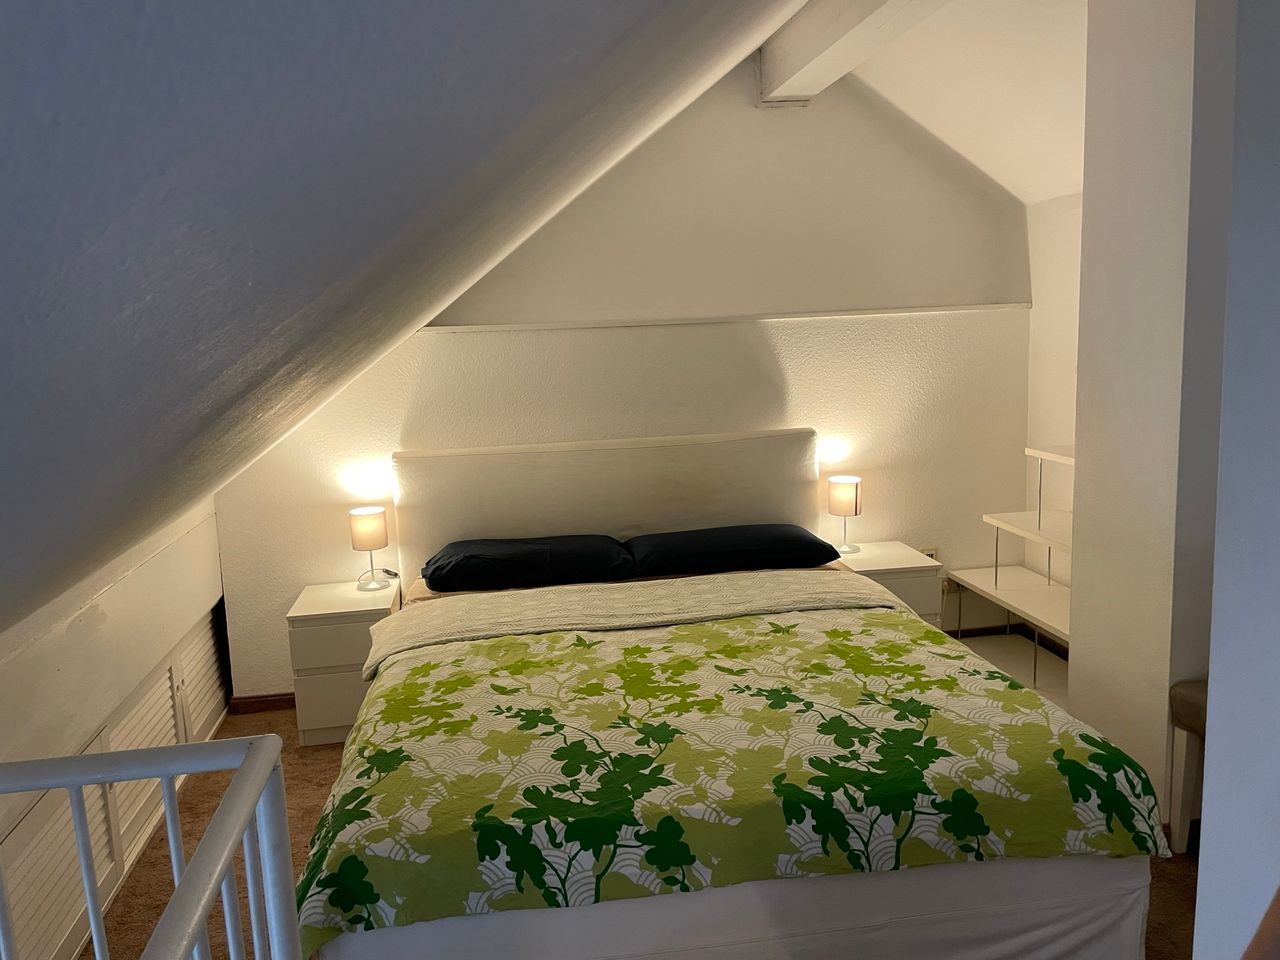 Beautiful furnished apartment with rooftop terrace, includes free parking in underground garage - 20 mins to Centre Munich